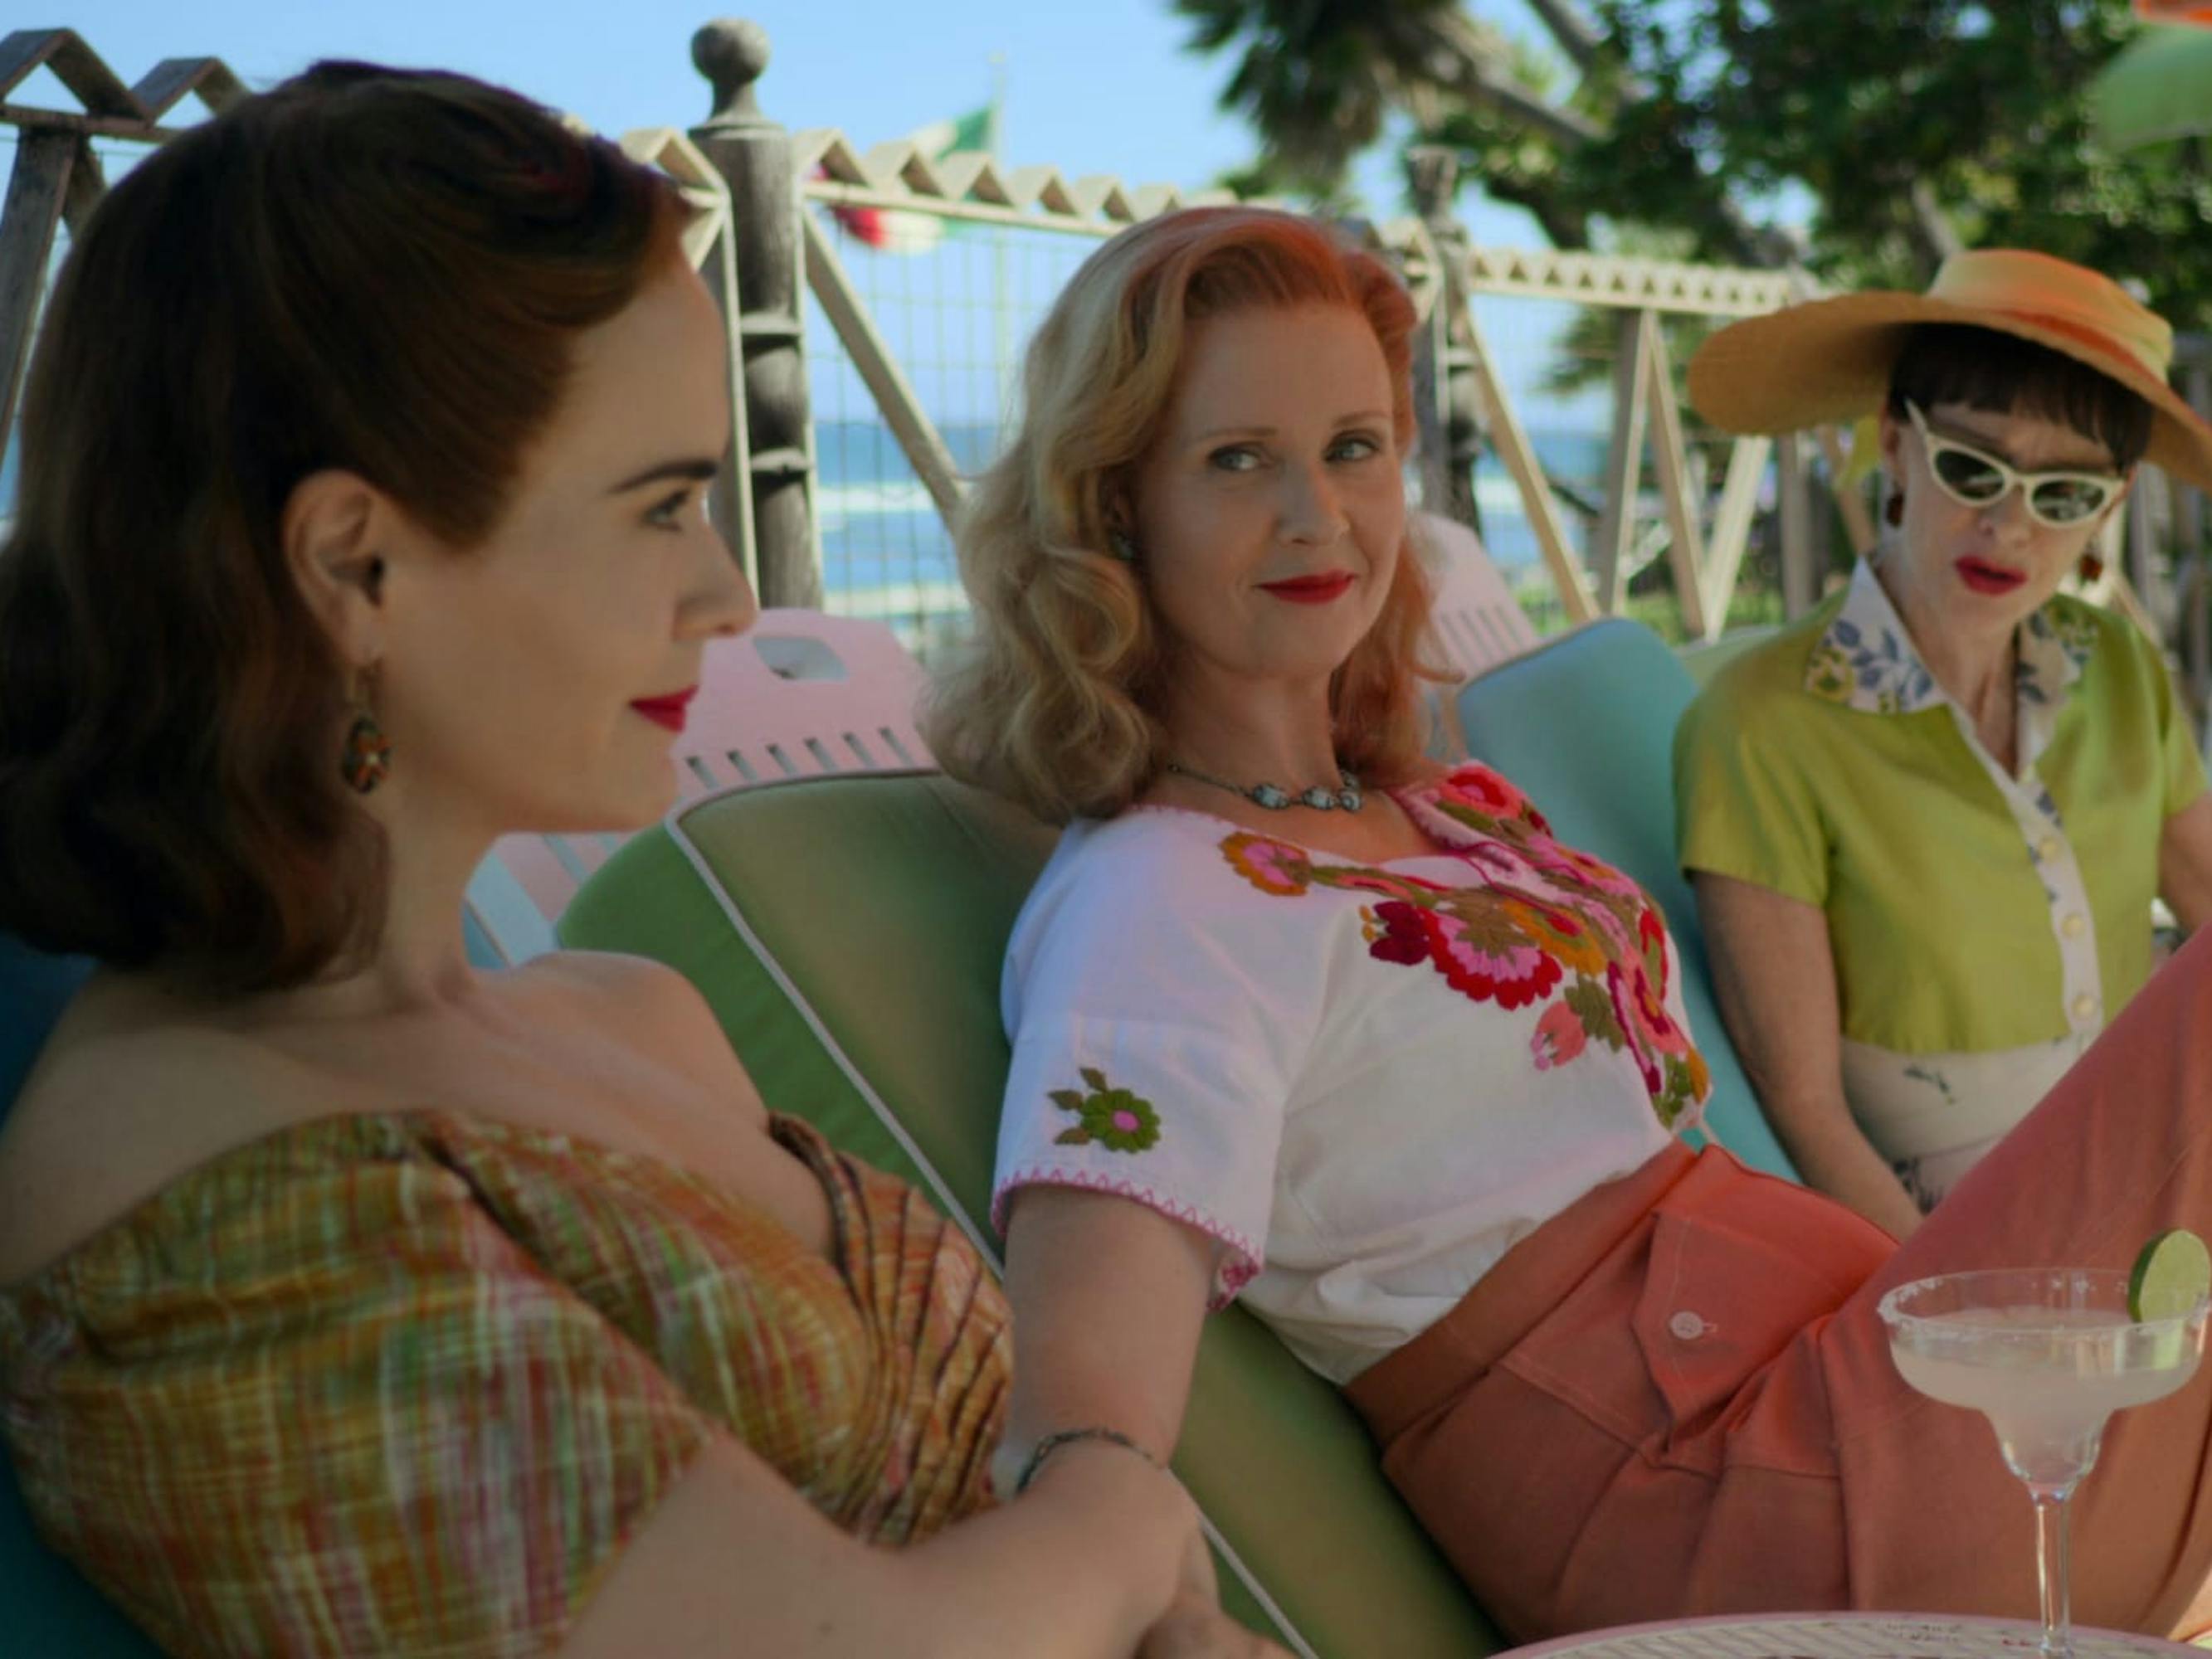 Nurse Mildred Ratched (Sarah Paulson), Gwendolyn Briggs (Cynthia Nixon), and Nurse Betsy Bucket (Judy Davis) sit outside on pool chaisses-lounges. Their hair is coiffed in classic sixties styles and they wear an assortment of bright colors, mostly pink and green. On an adjacent table sits a margarita with a lime on the side.